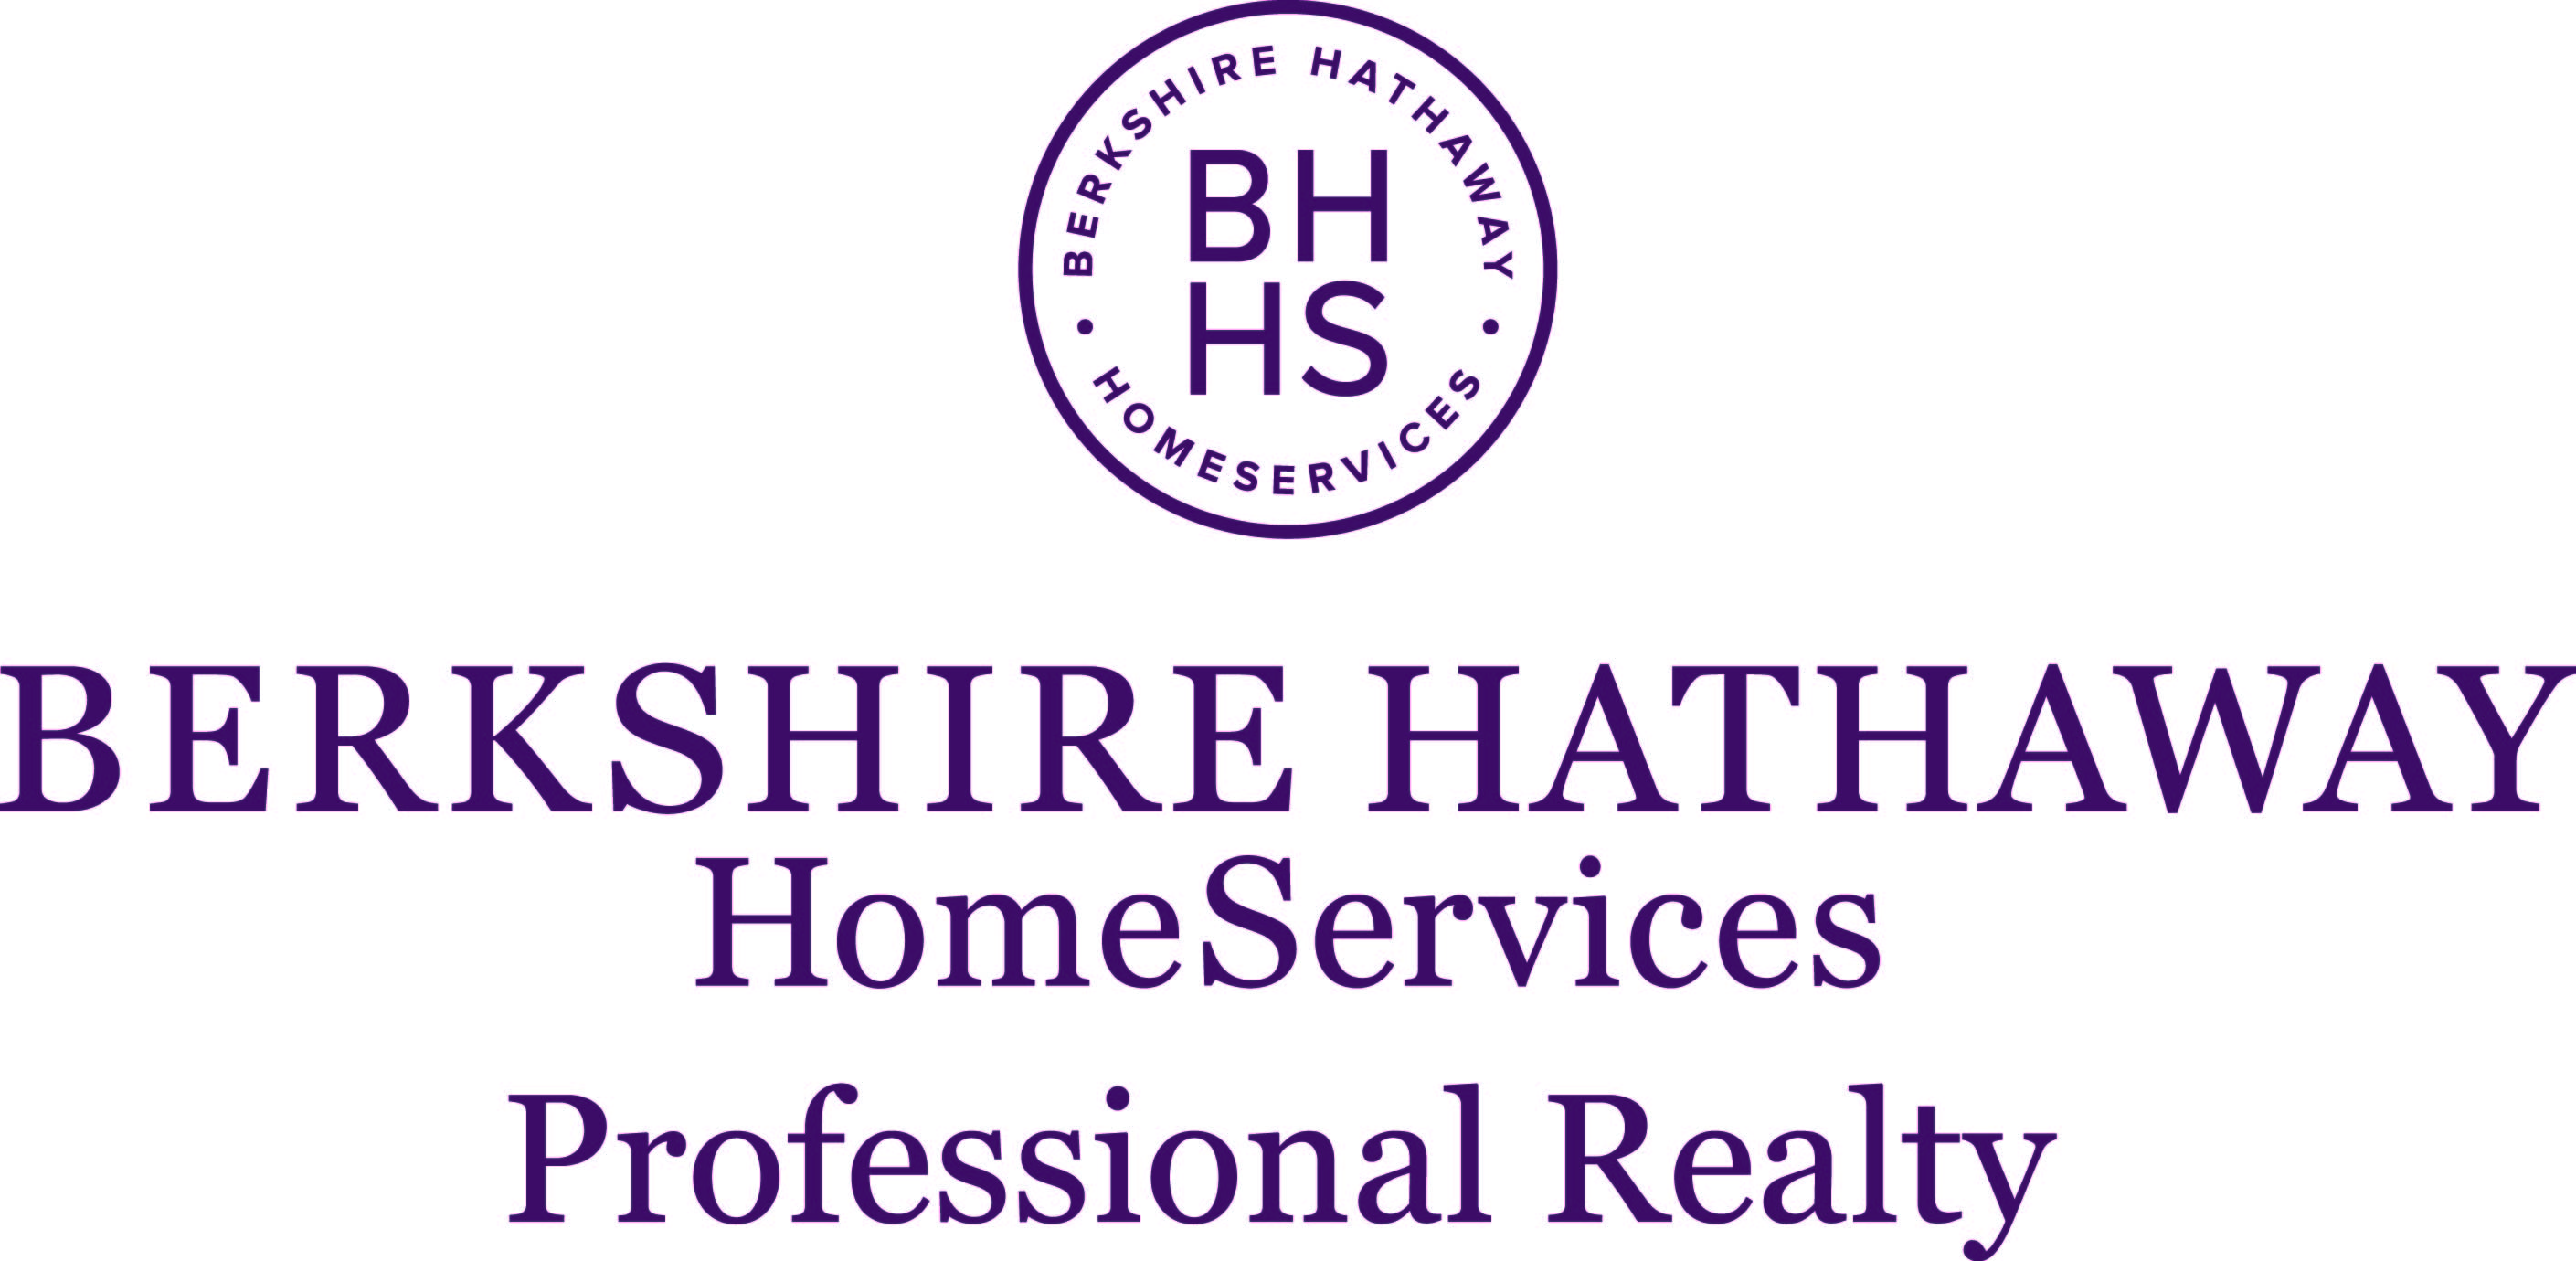 Berkshire Hathaway HomeServices Professional Realty Opens New Xenia Office!